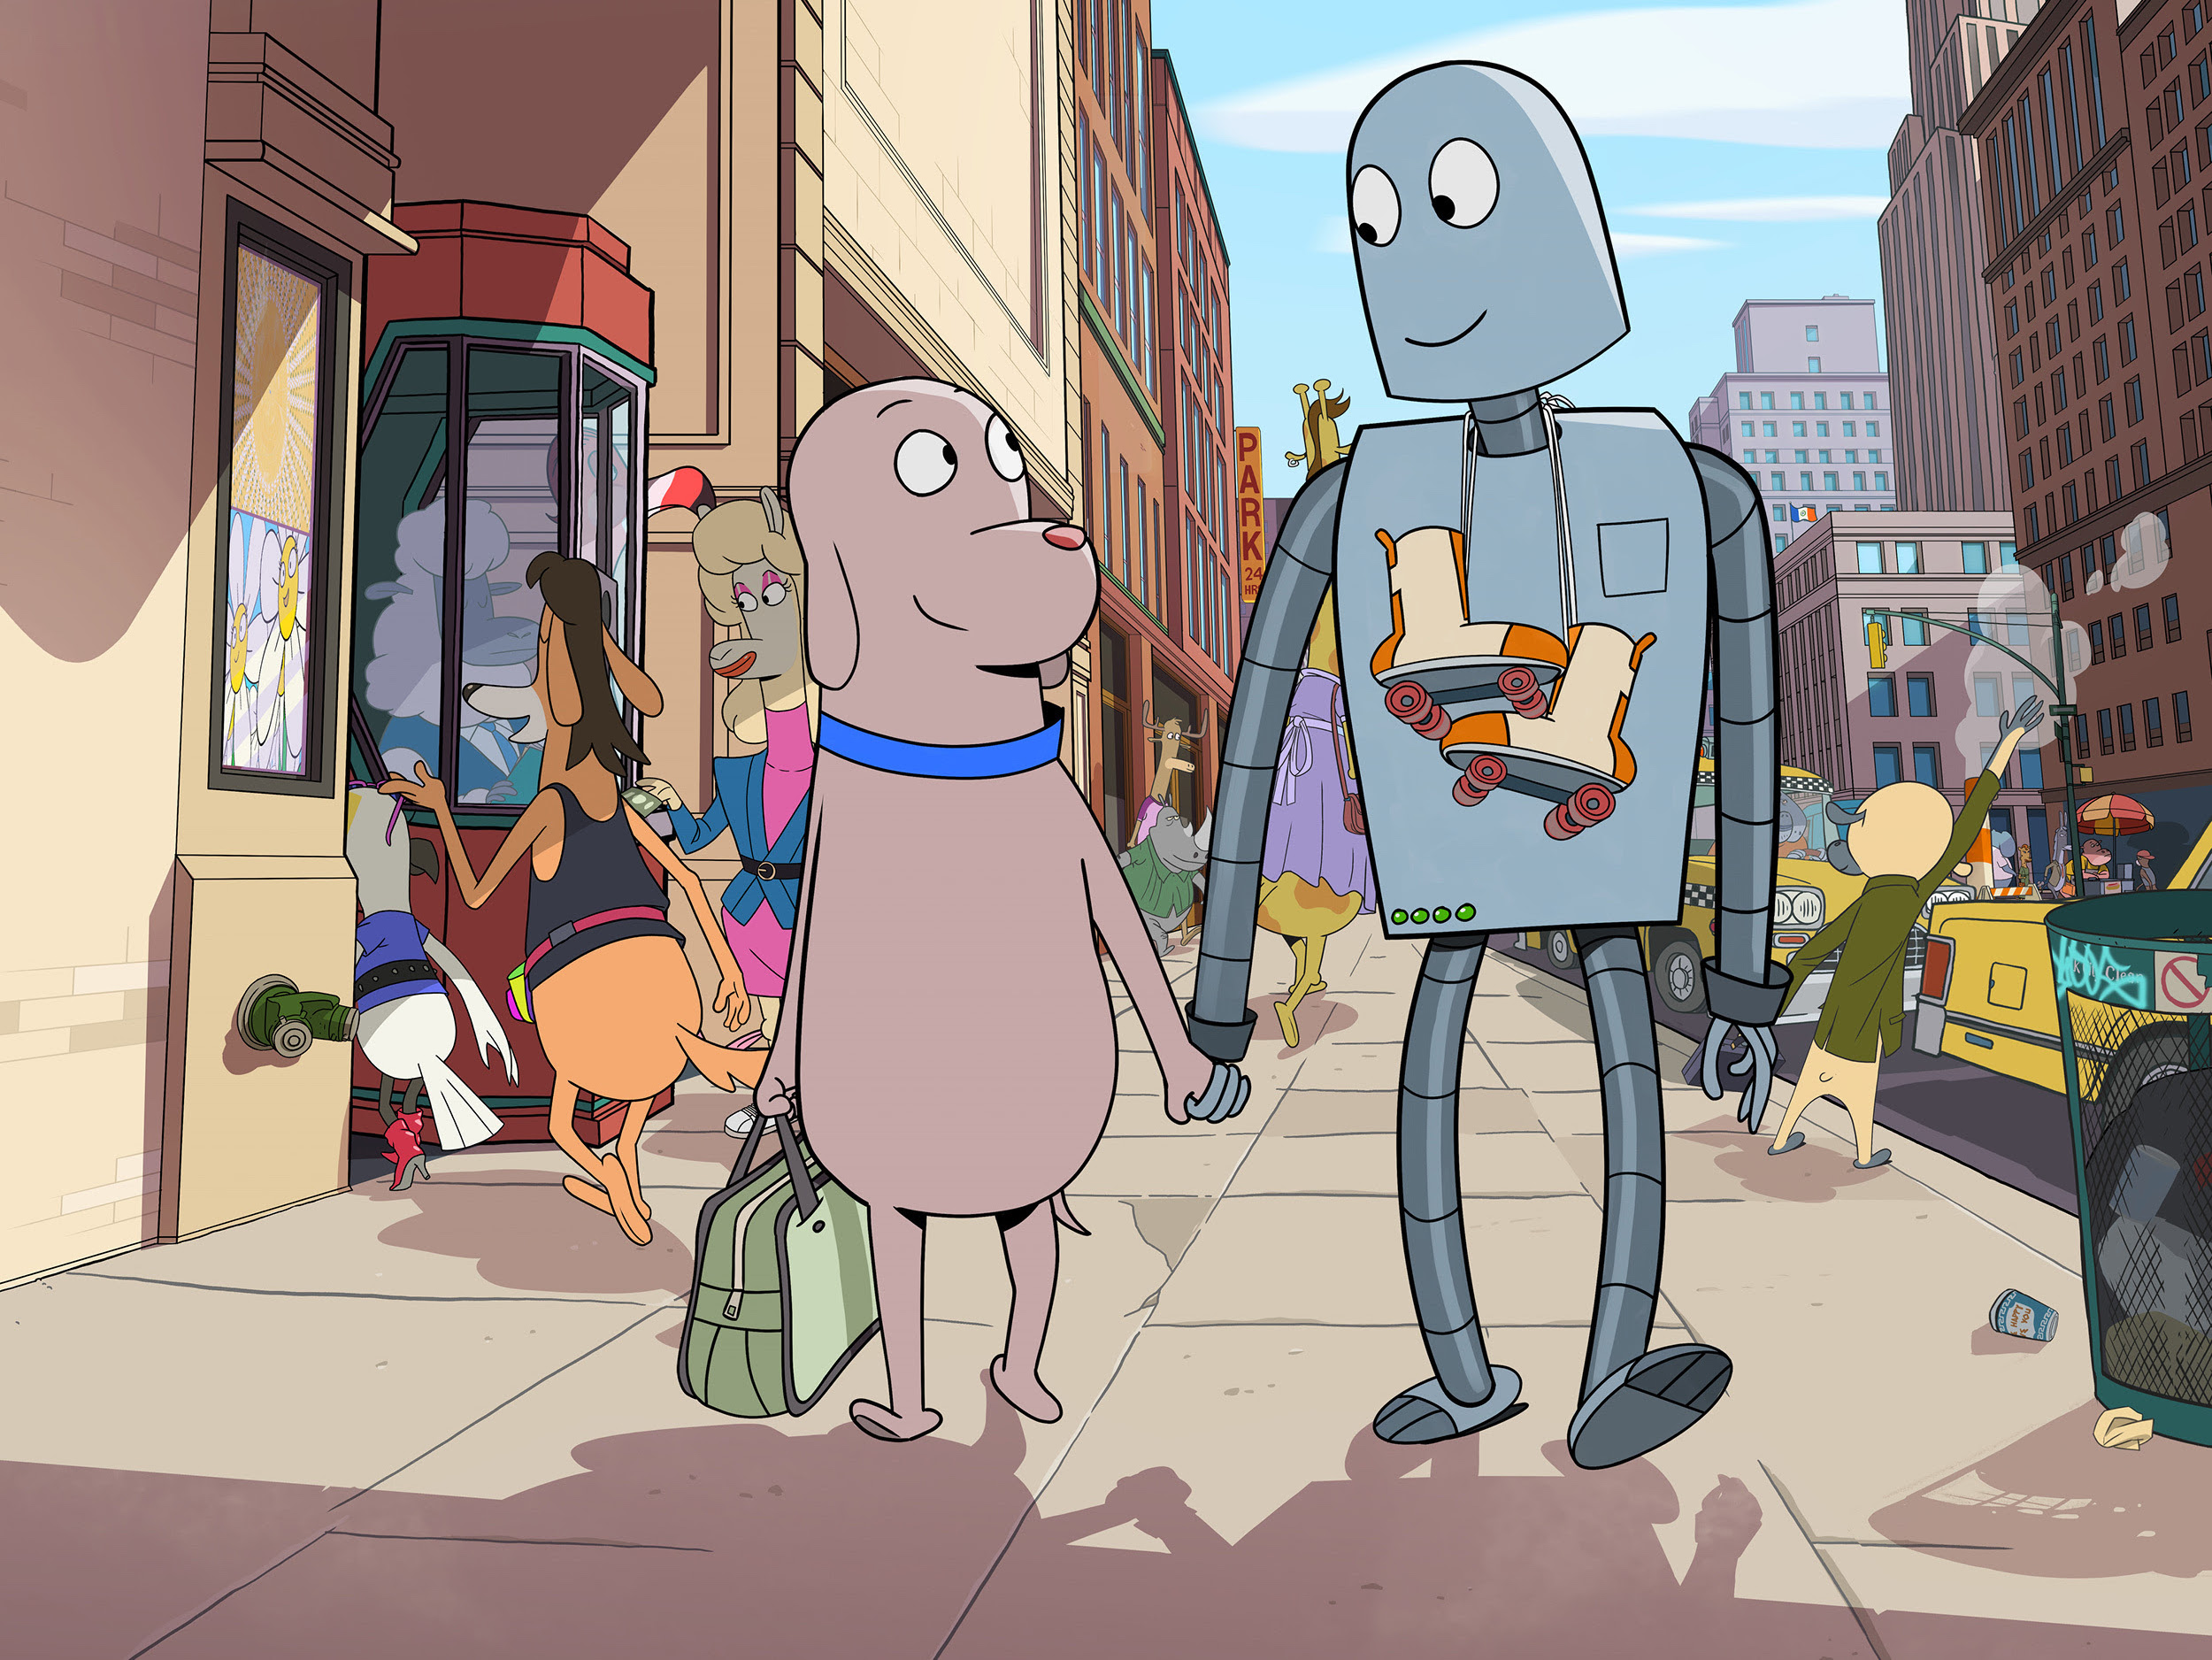 An image of an anthropomorphic cartoon dog carrying a briefcase, smiling and holding hands with a tall, gangly robot, as they walk through the streets of the East Village in New York City in the animated feature Robot Dreams